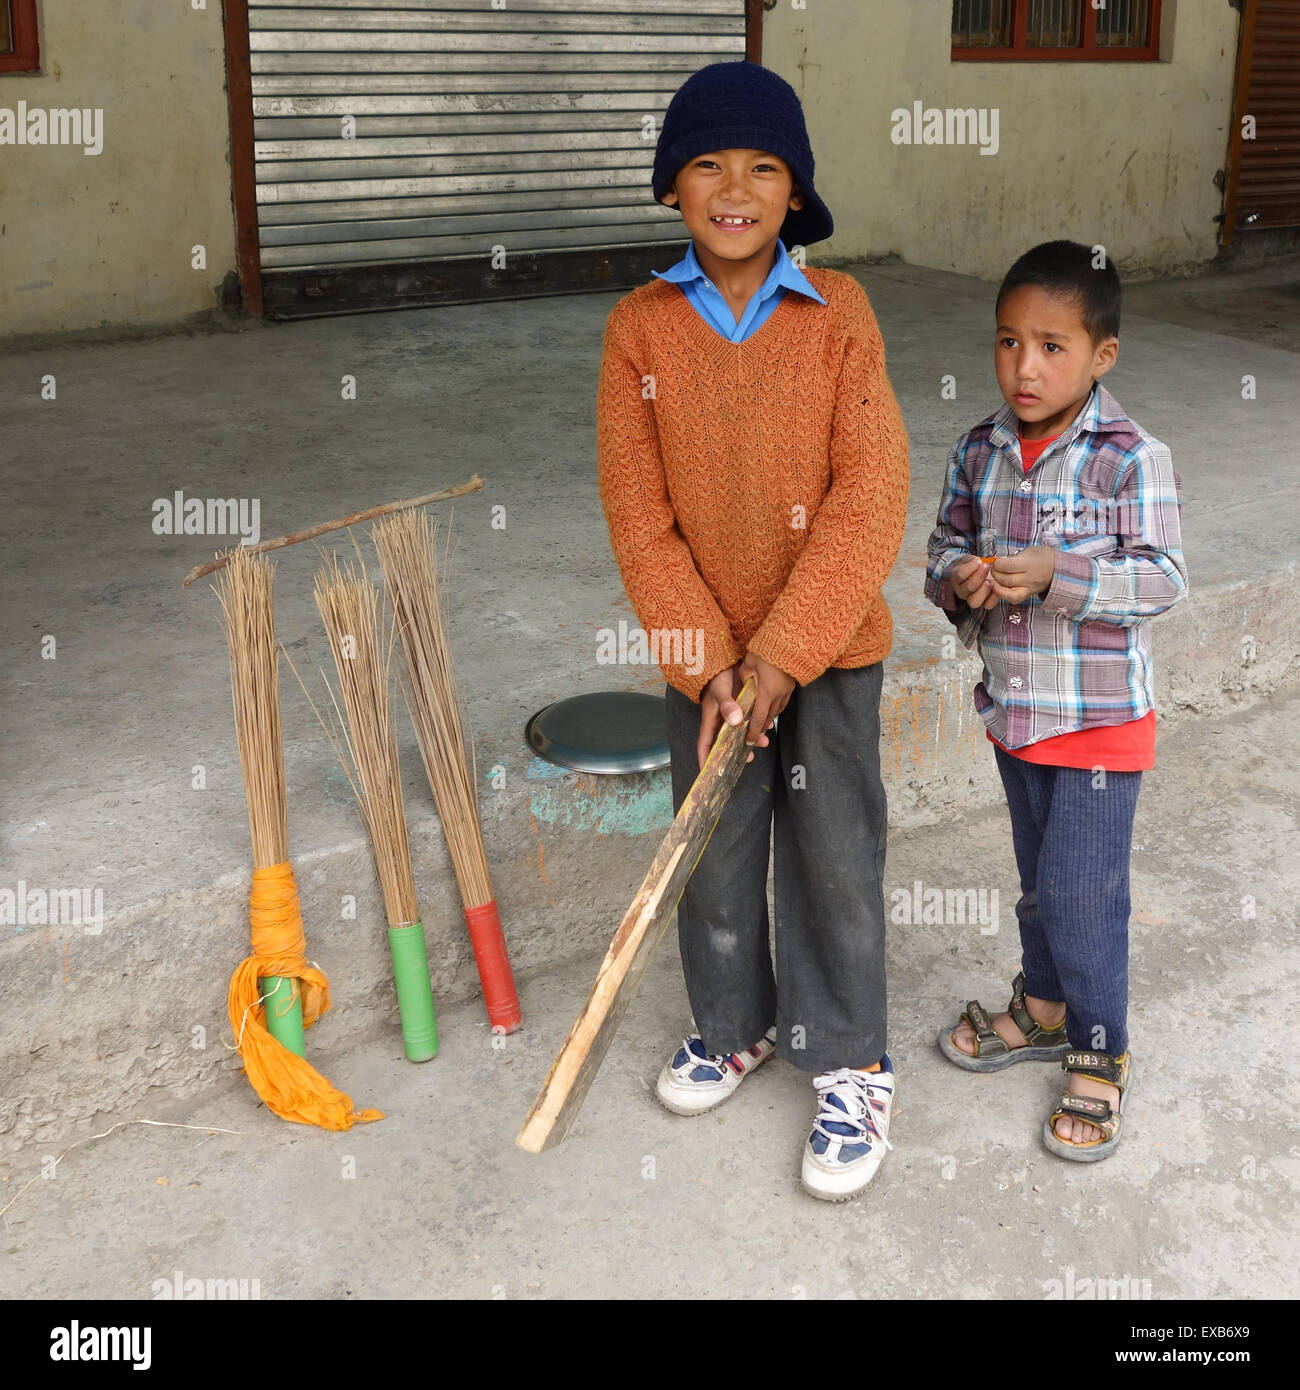 young boys playing cricket in a village in the Indian Himalayas - Spiti Valley, Himachal Pradesh, India. Stock Photo